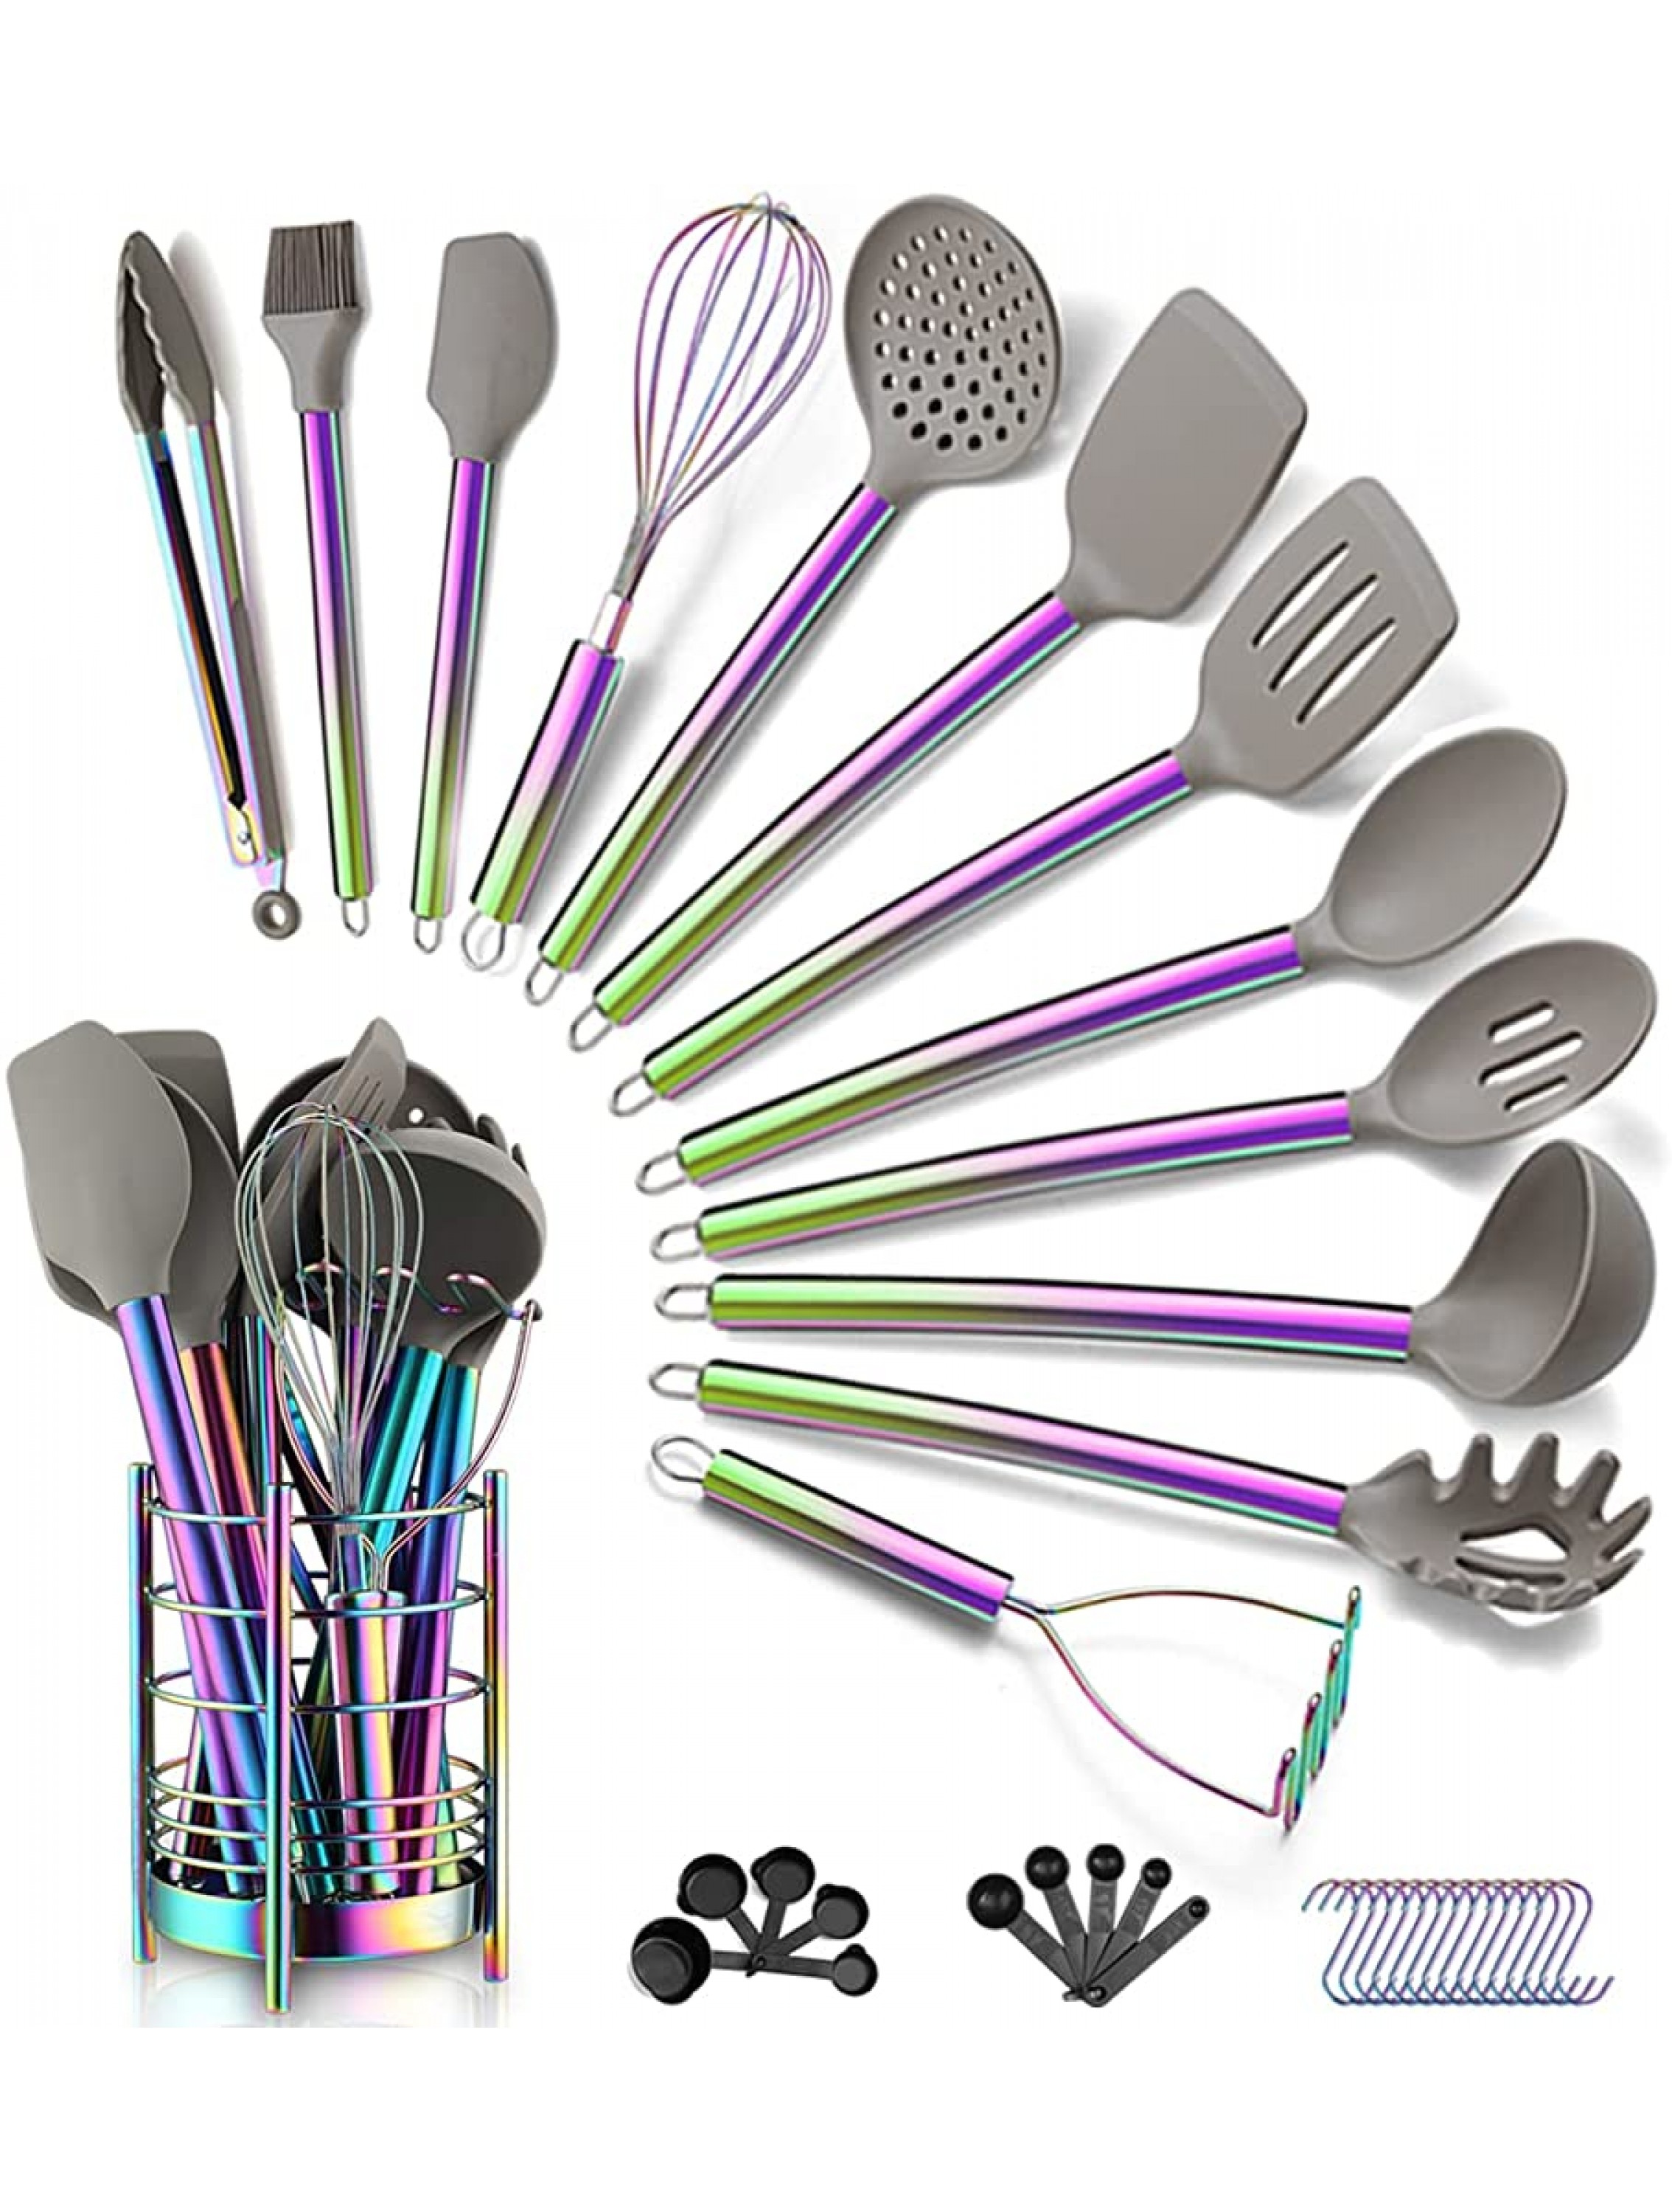 38 Piece Silicone kitchen Cooking Utensils Set with Utensil Crocks Silicone Head and Stainless Steel Handle Cookware Kitchen Tools Non-Stick kitchen Gadgets Dishwasher Safe Rainbow - BDG2N4EWB